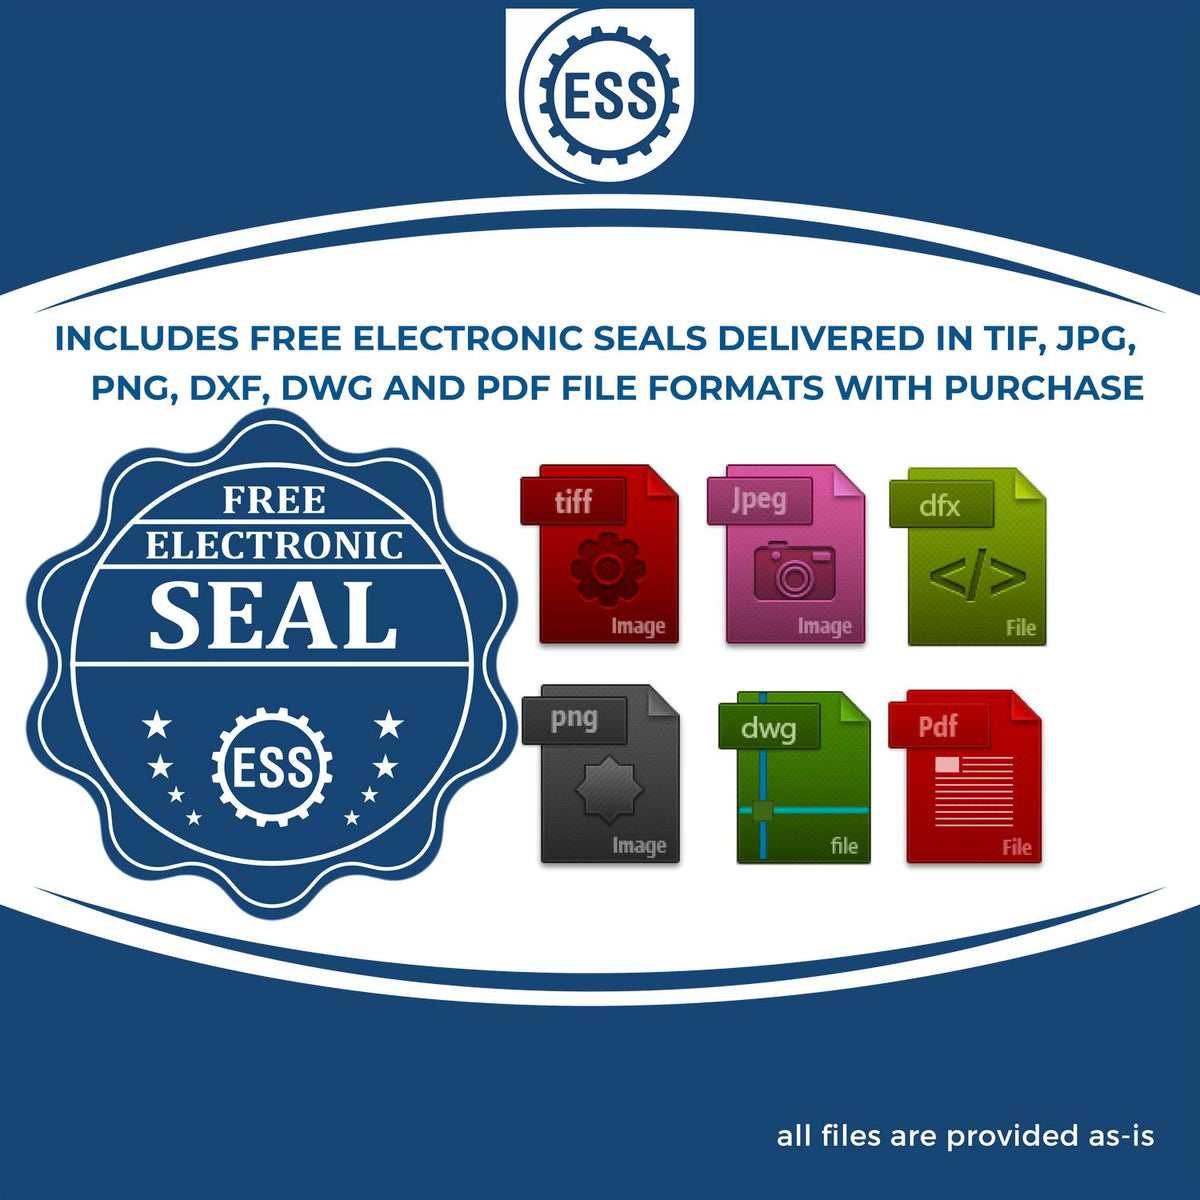 An infographic for the free electronic seal for the Long Reach Vermont PE Seal illustrating the different file type icons such as DXF, DWG, TIF, JPG and PNG.